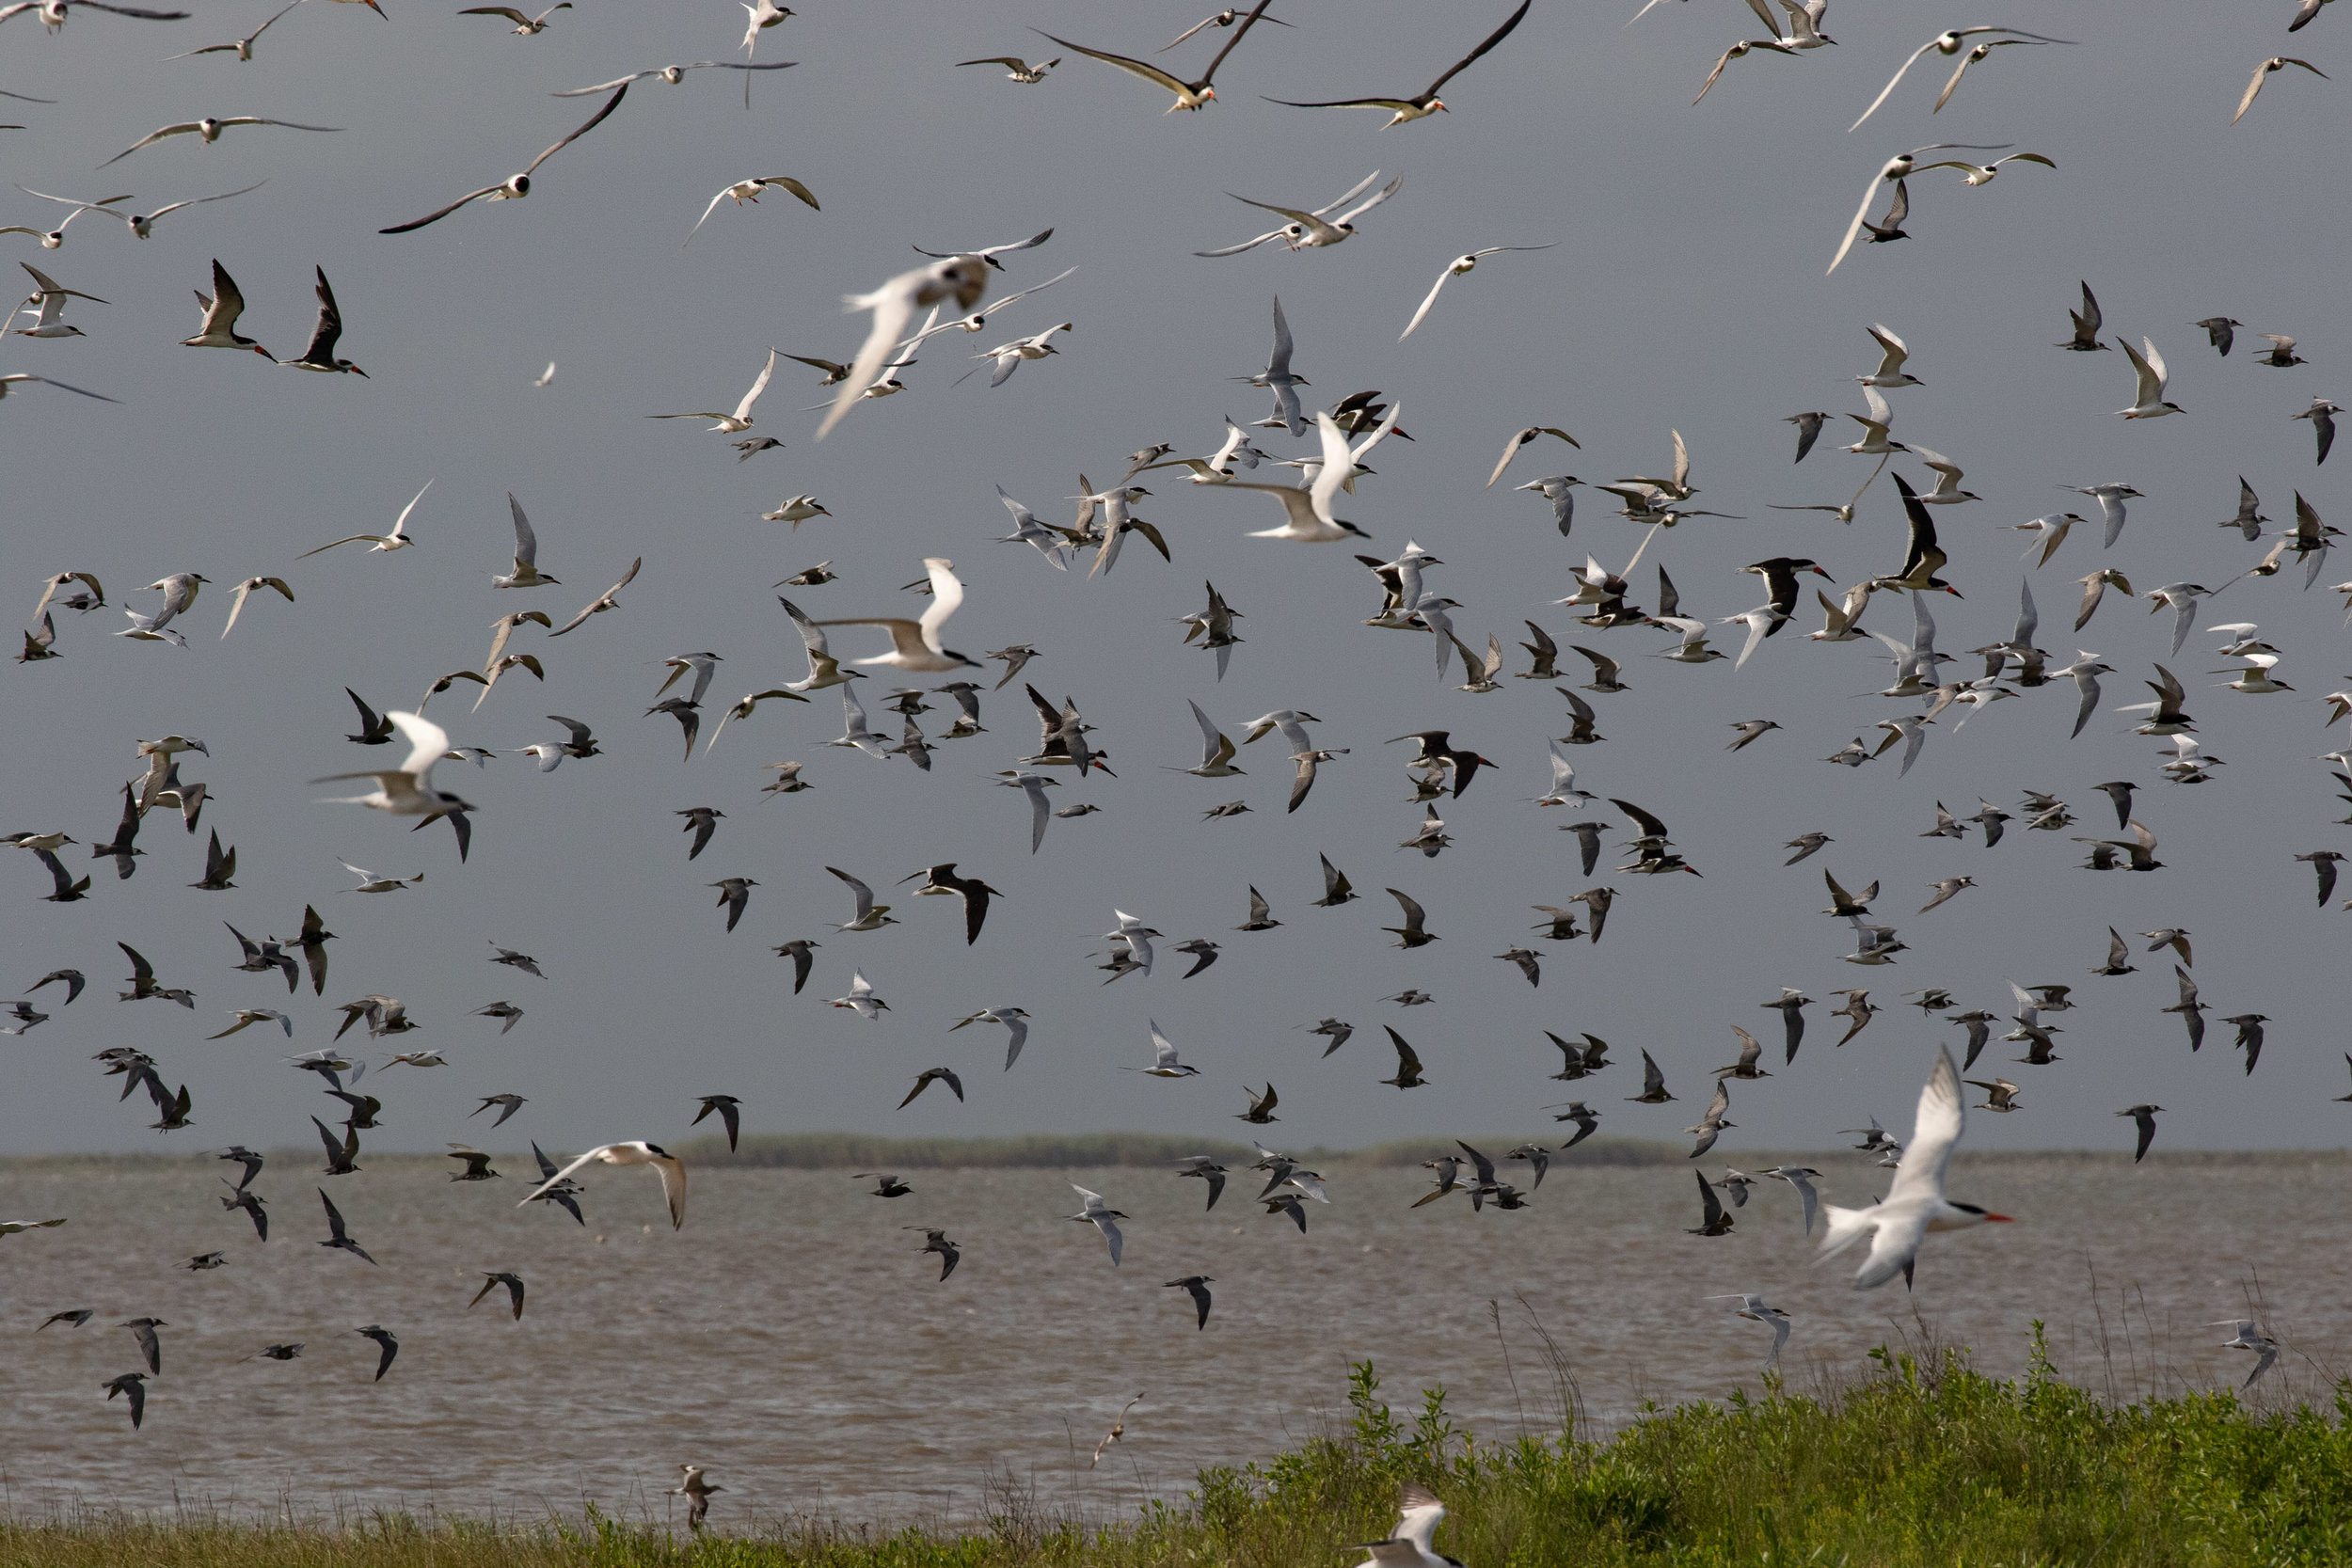 Mixed terns and skimmers